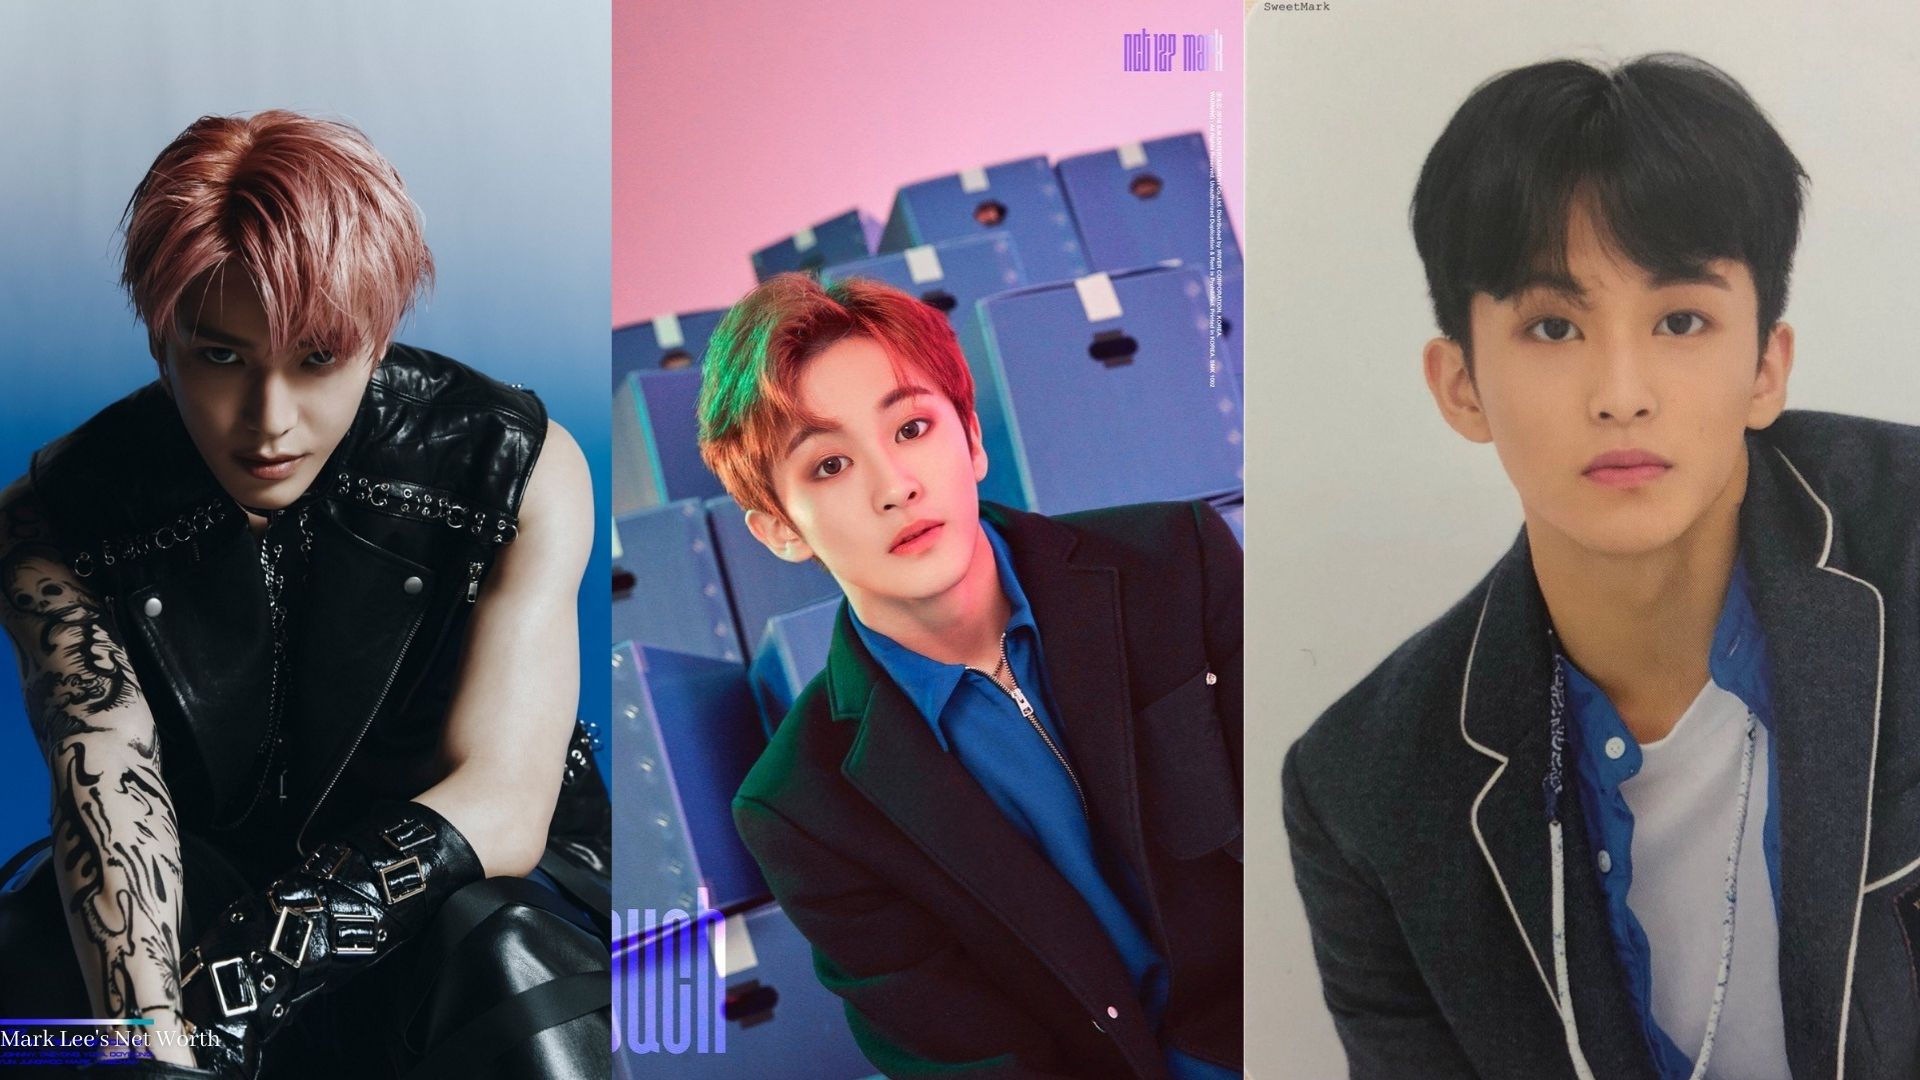 Mark Lee’s Net Worth: How Rich Is the NCT Member?